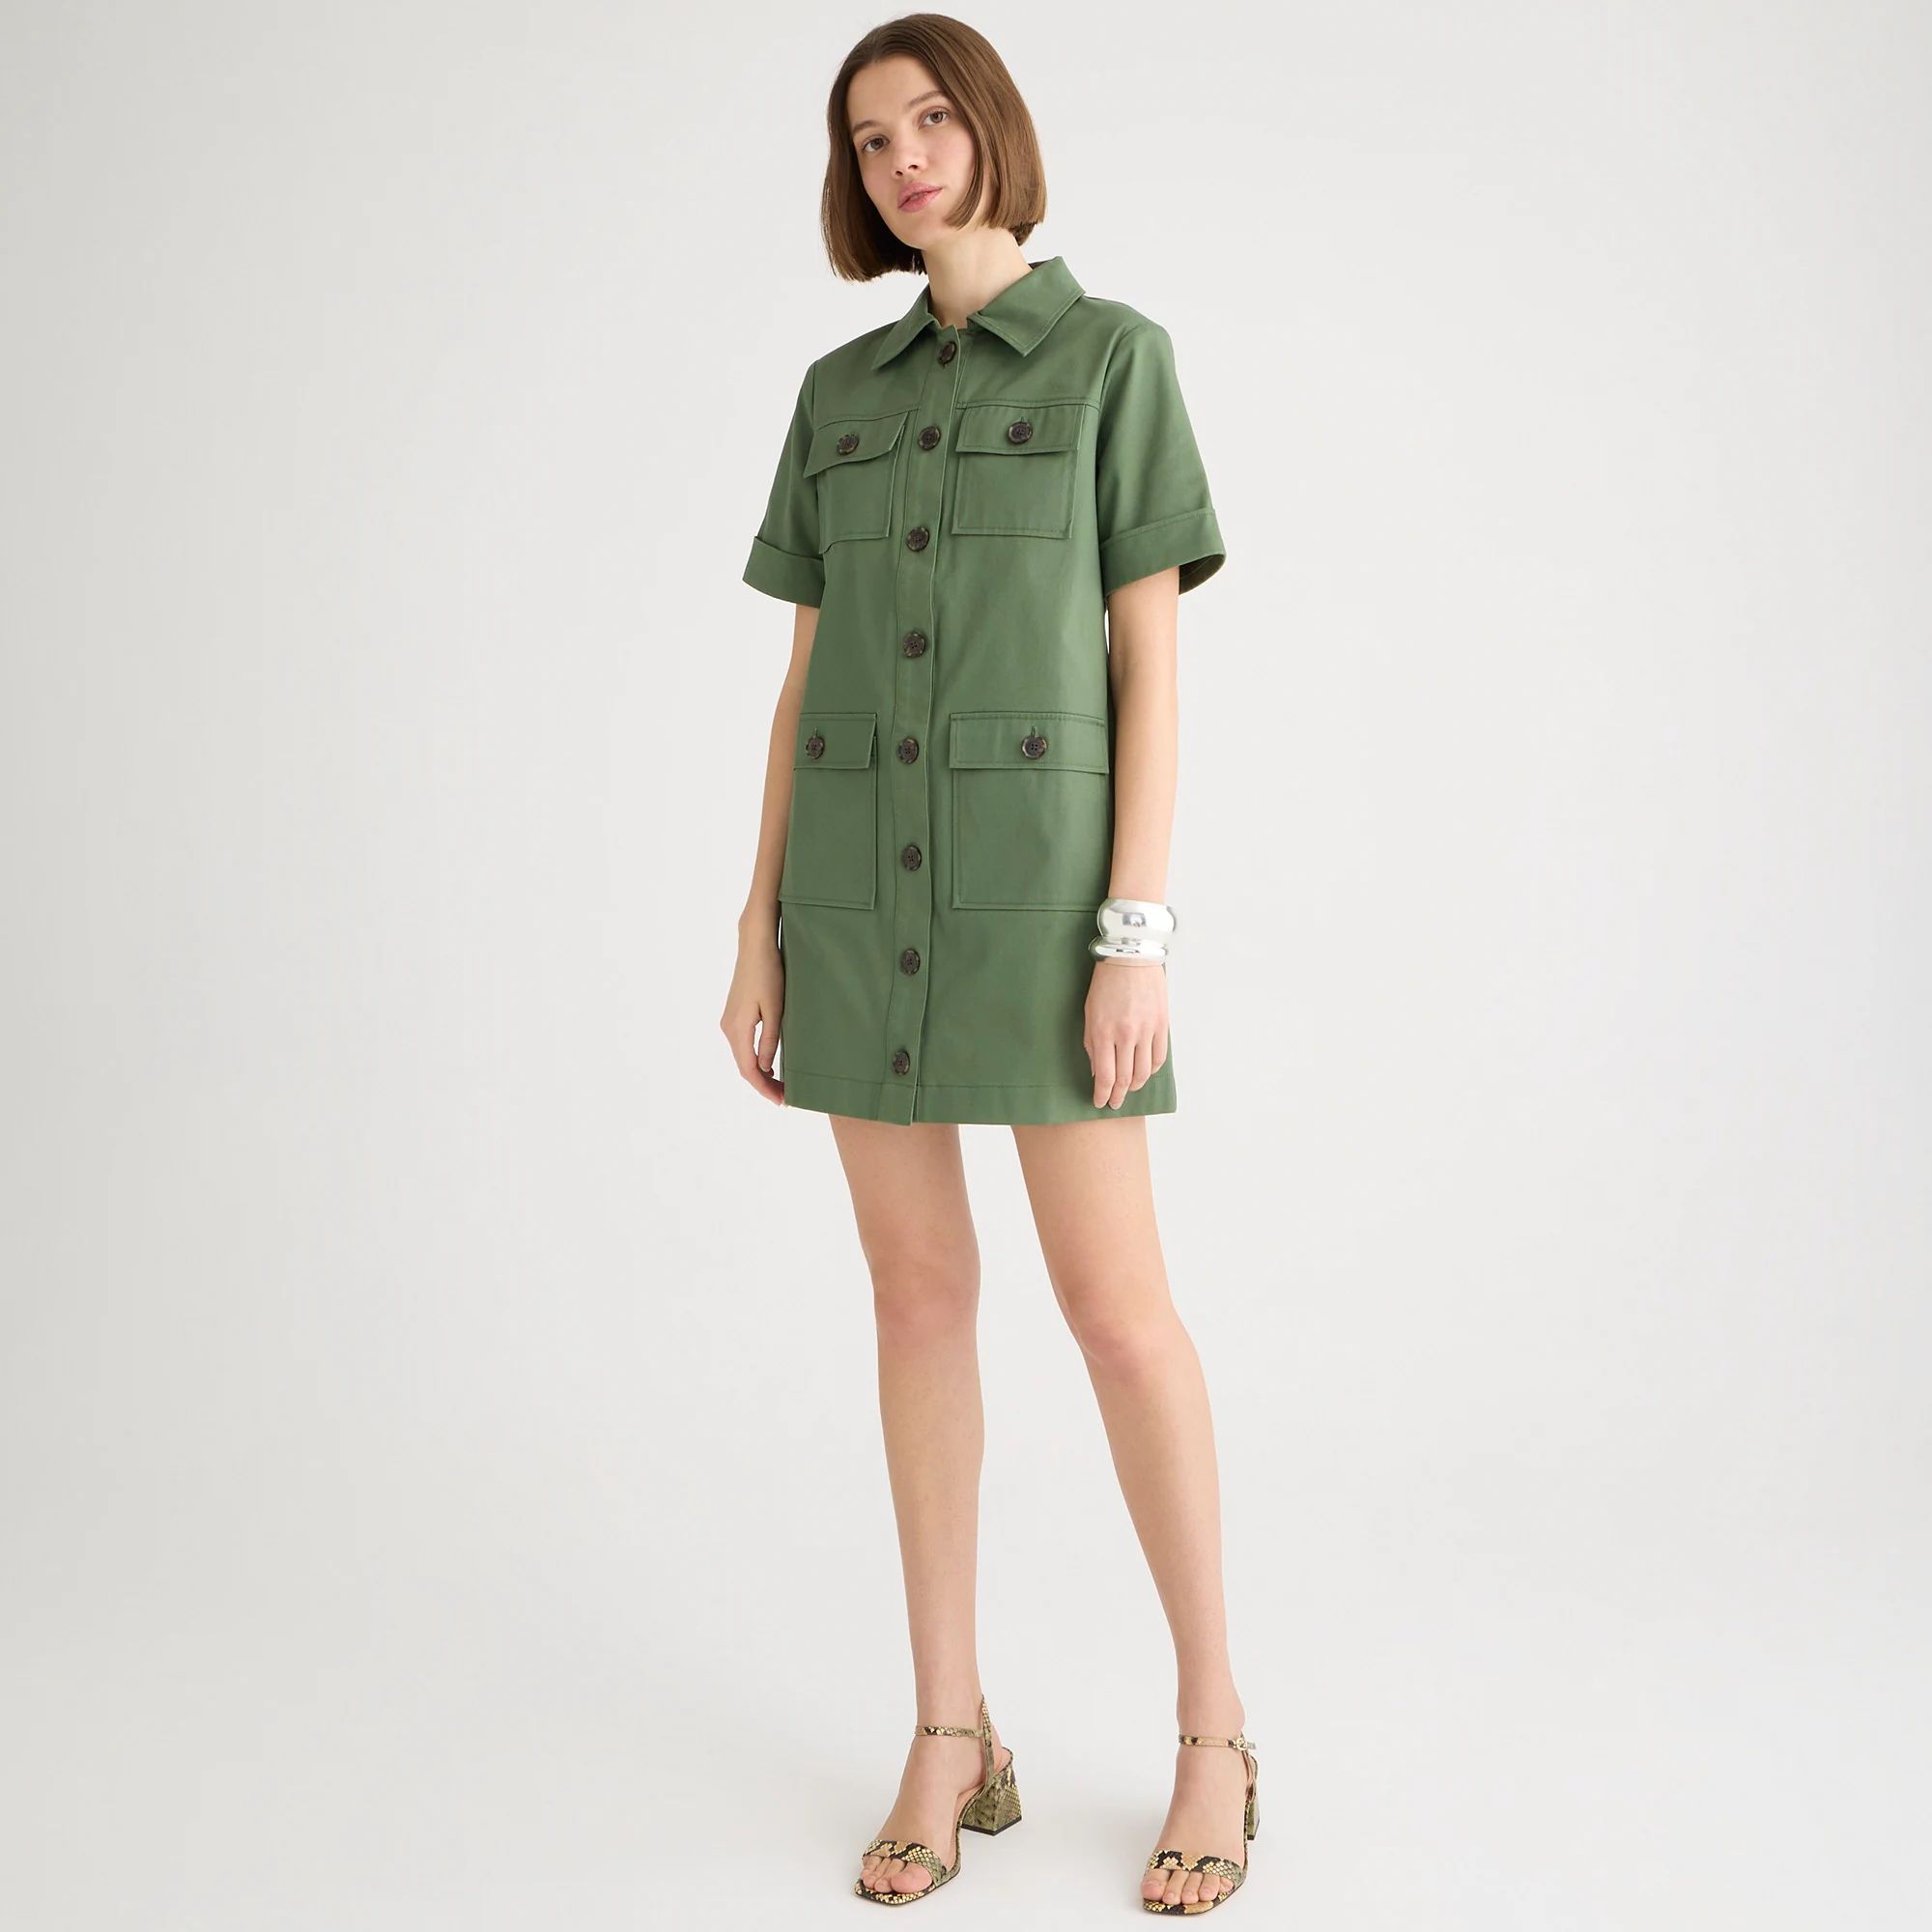 best seller4.4(22 REVIEWS)Gamine shirtdress in stretch twill$114.50$128.00 (11% Off)Annual Spring... | J.Crew US